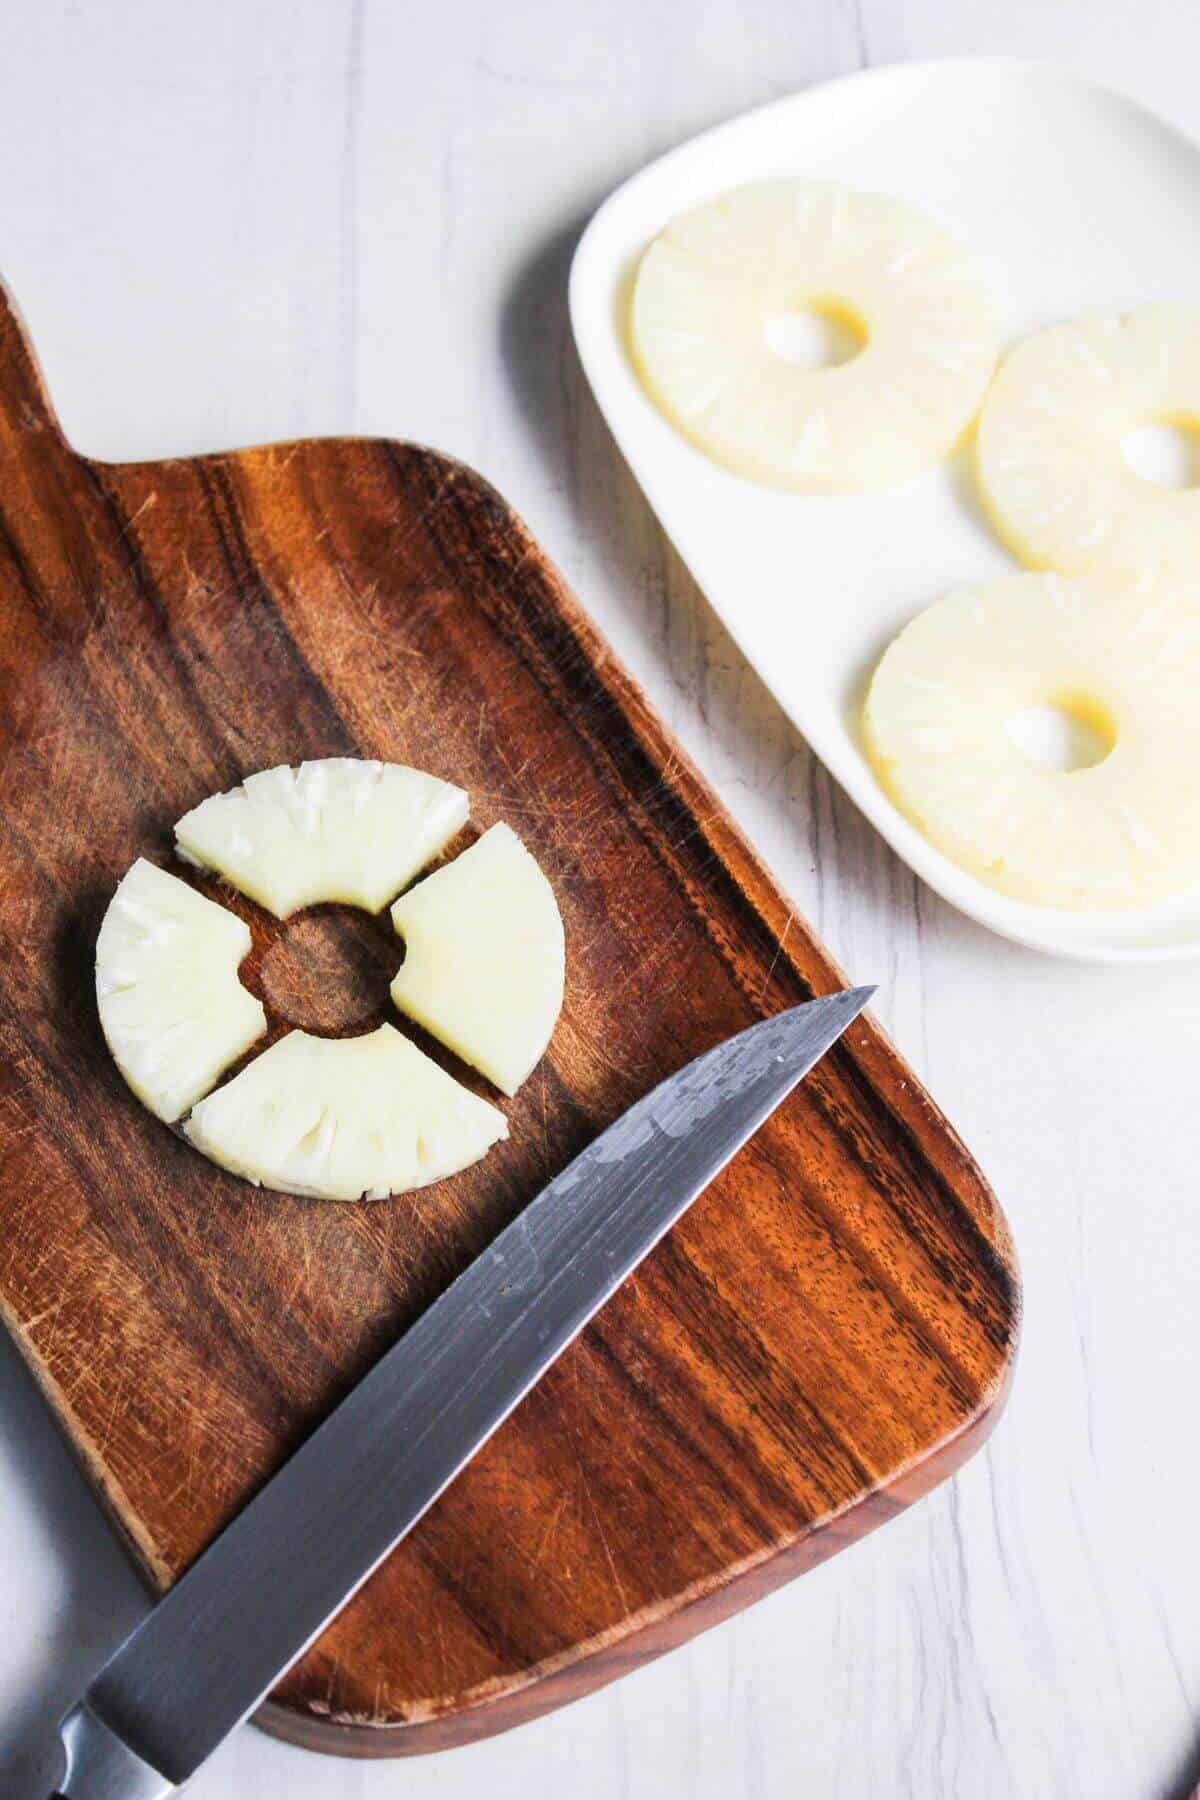 Pineapple slices on a cutting board with a knife.